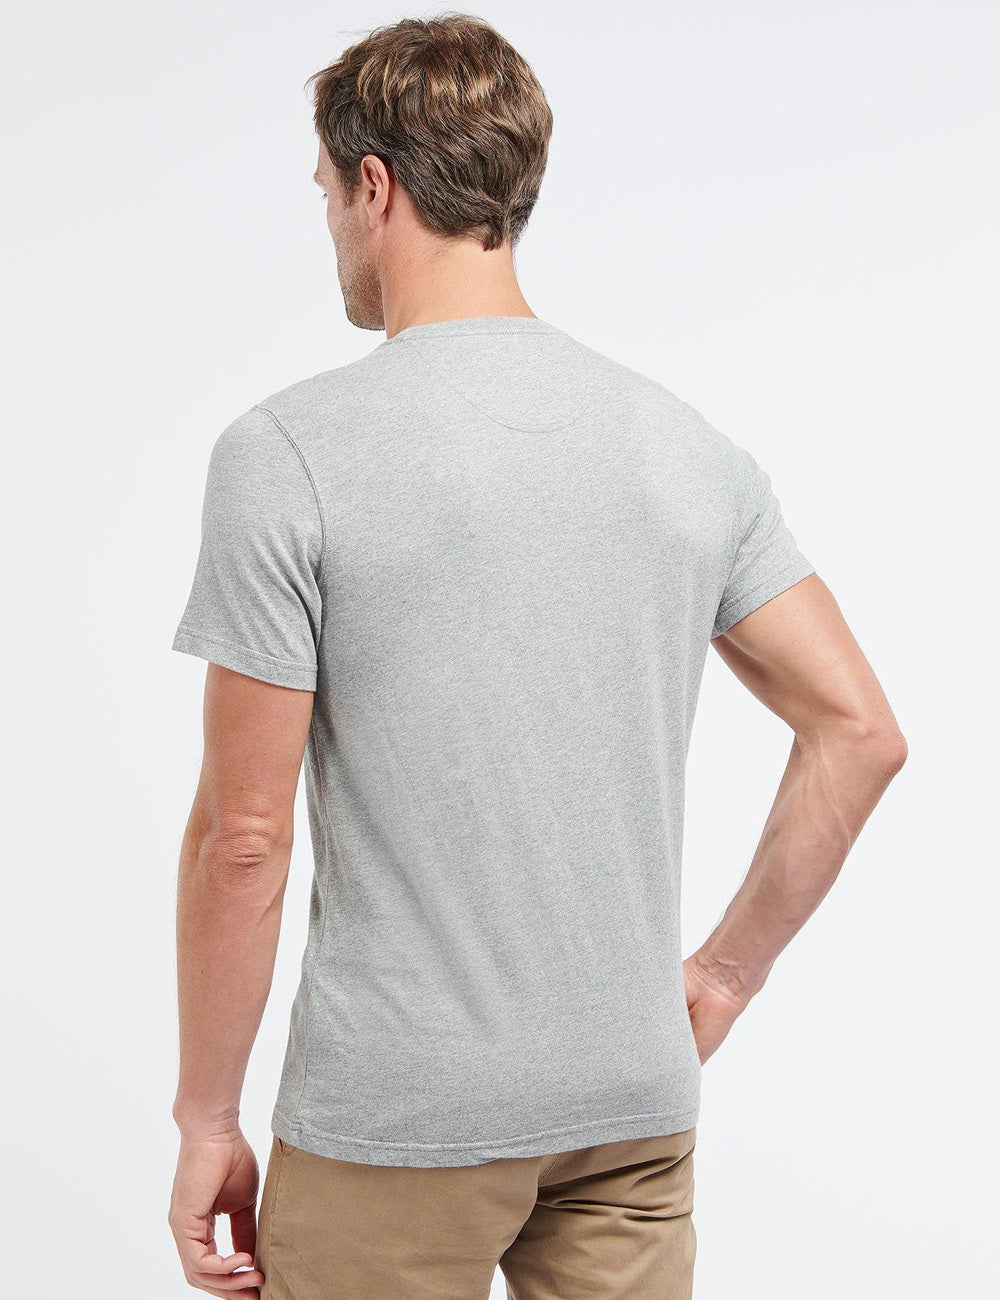 Barbour Reed T-Shirt - Grey Marl